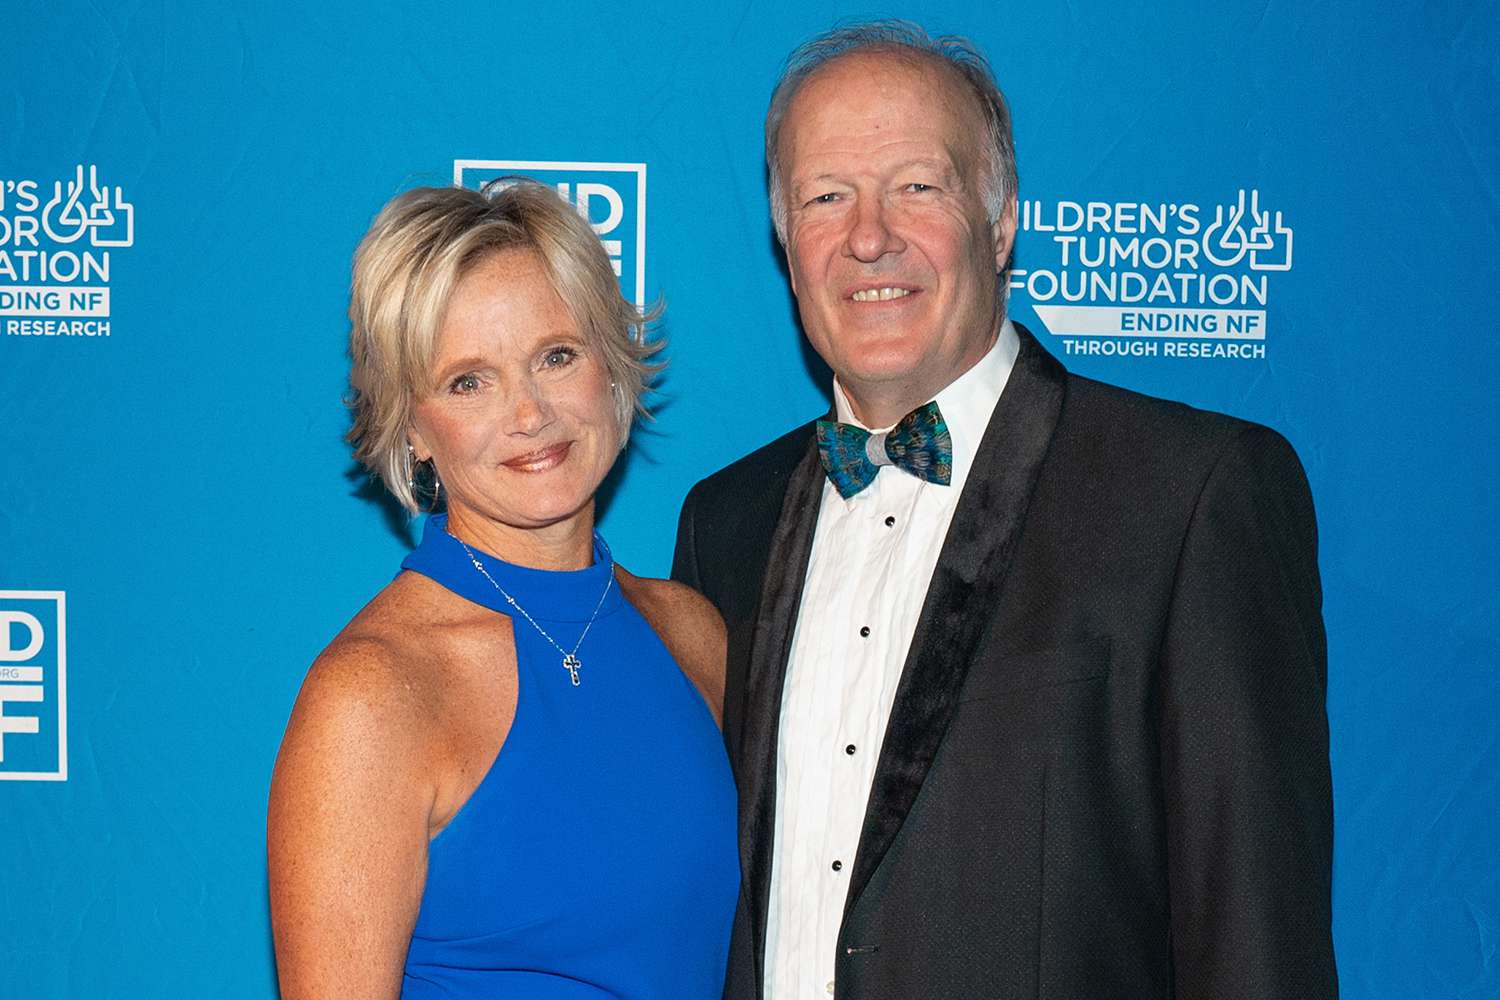 Michele Holbrook and her husband John Holbrook attend the annual Children's Tumor Foundation National Gala on November 14, 2022.